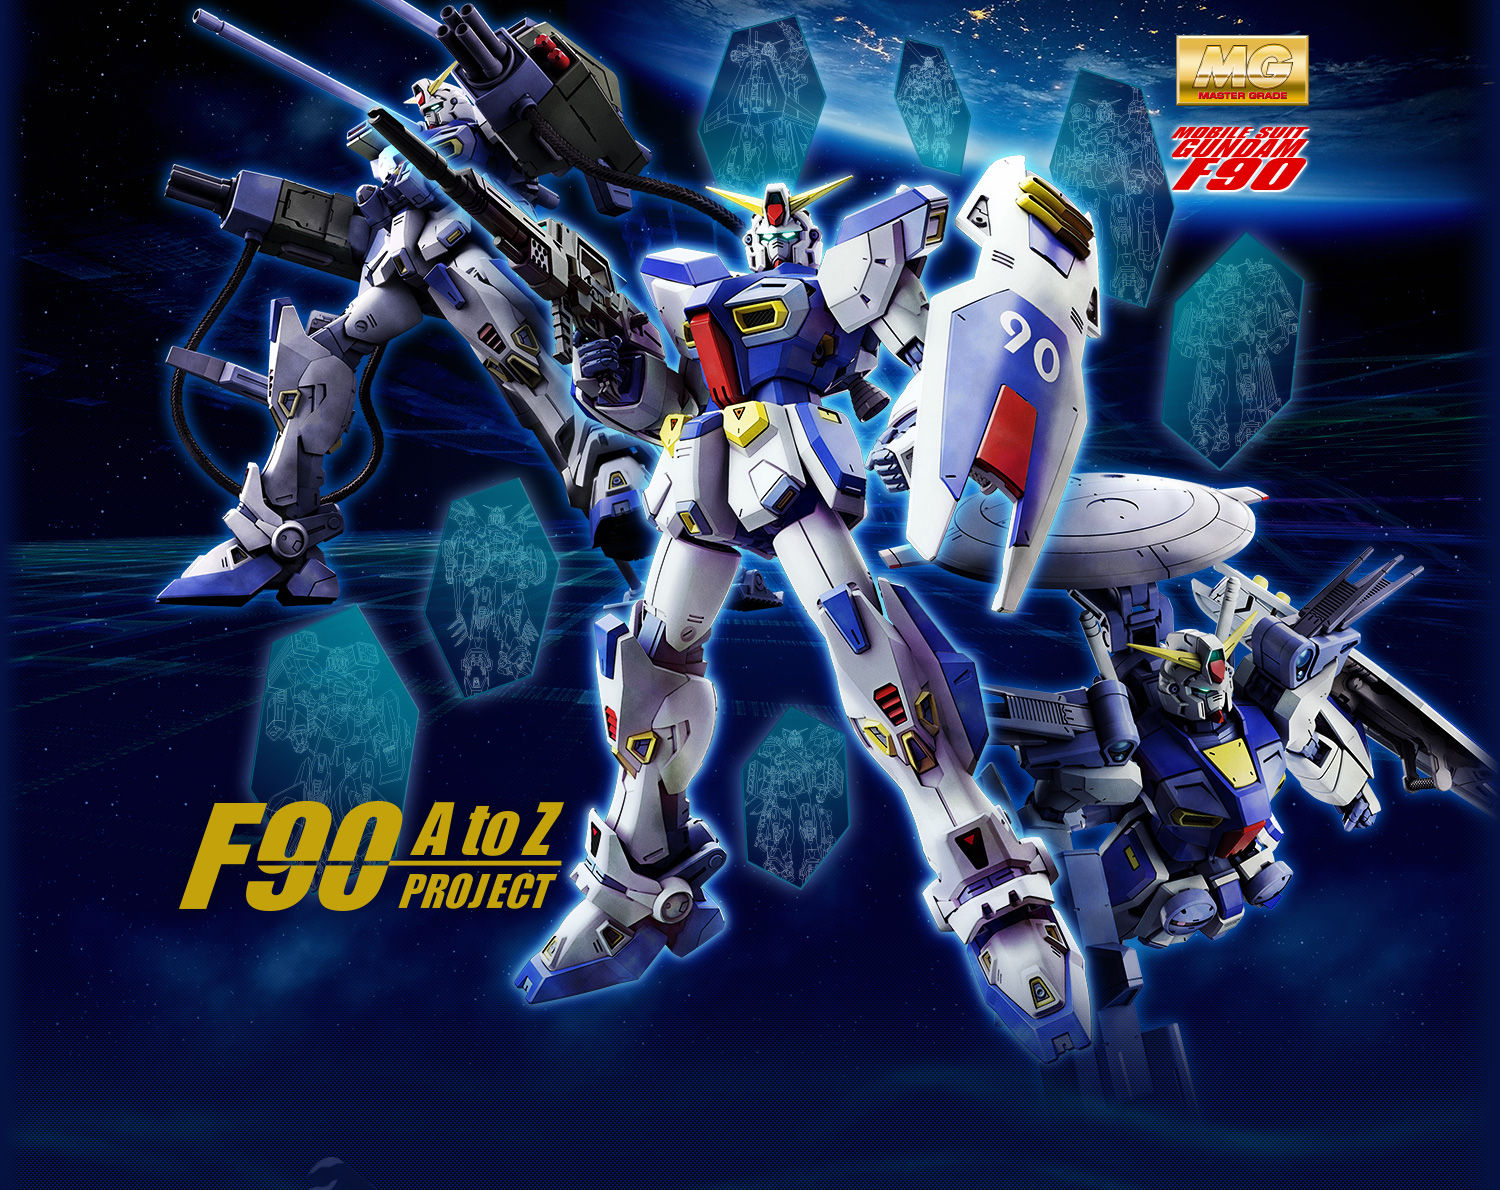 Mobile Suite Gundam F90 A to Z Project